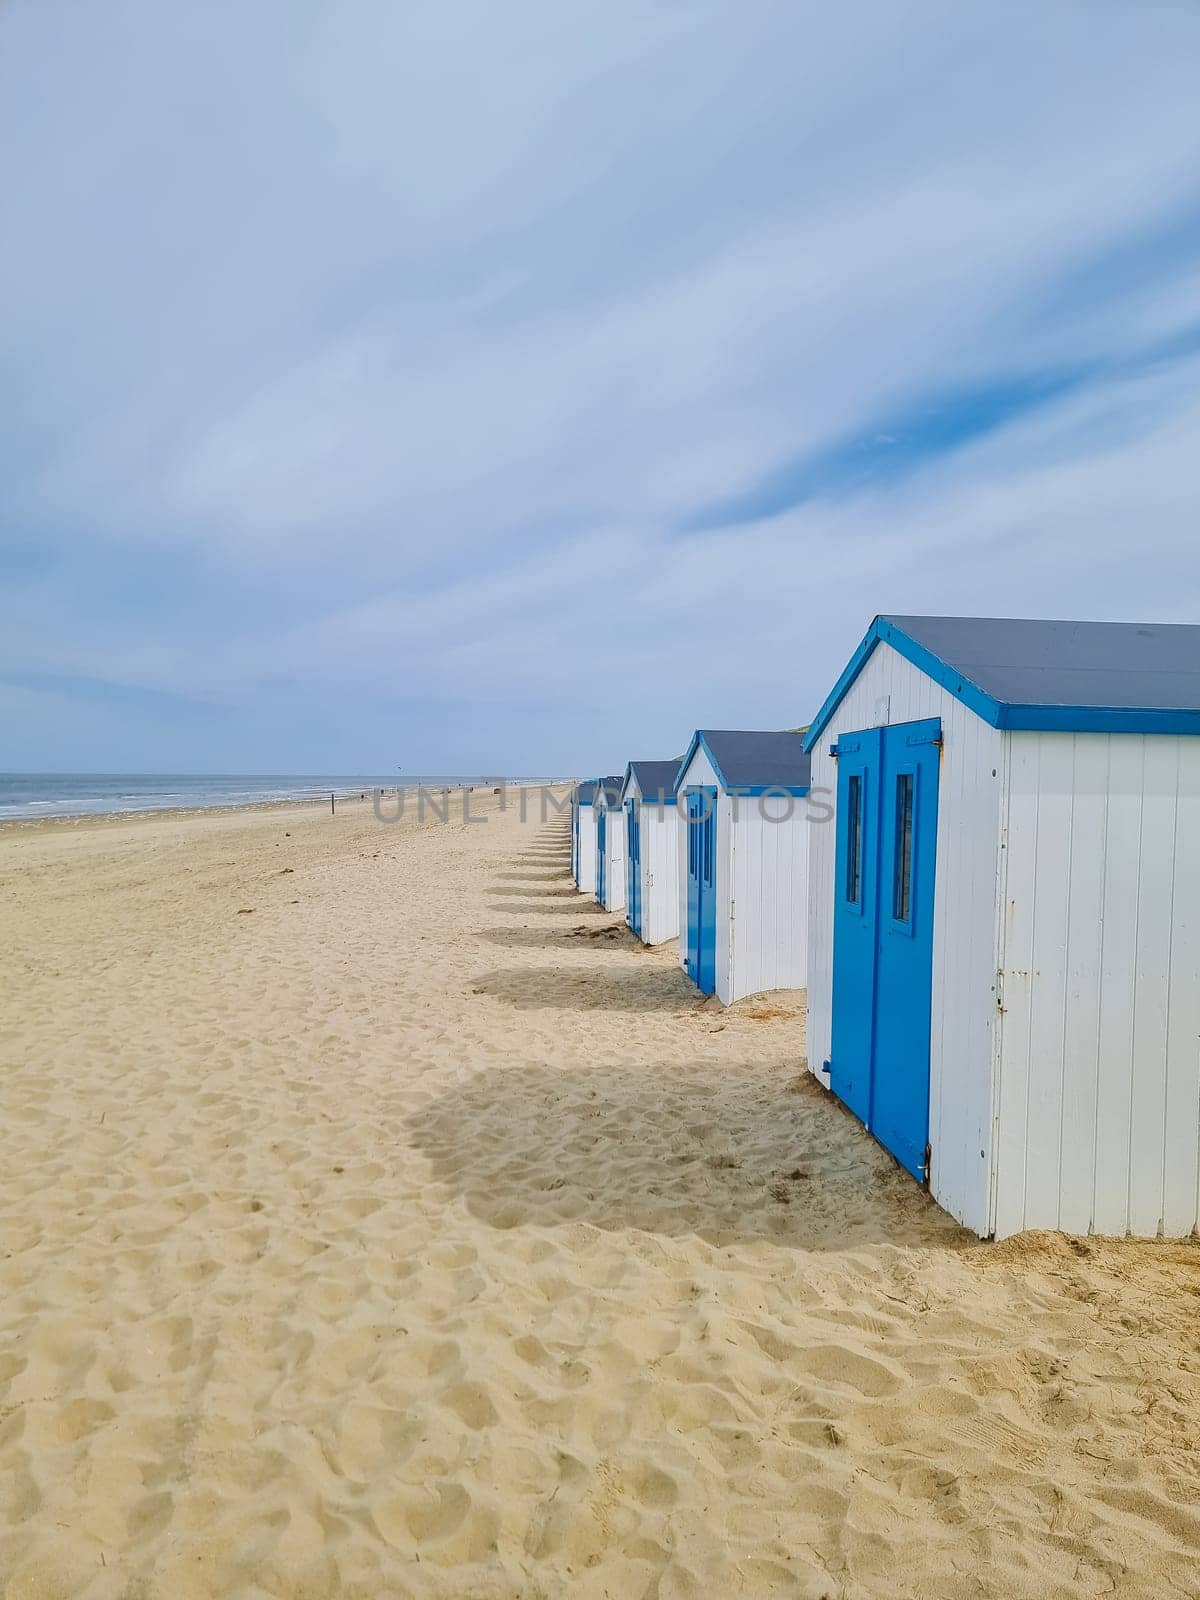 Colorful beach huts line the sandy shores of Texel in the Netherlands, creating a picturesque and serene scene by the sea.